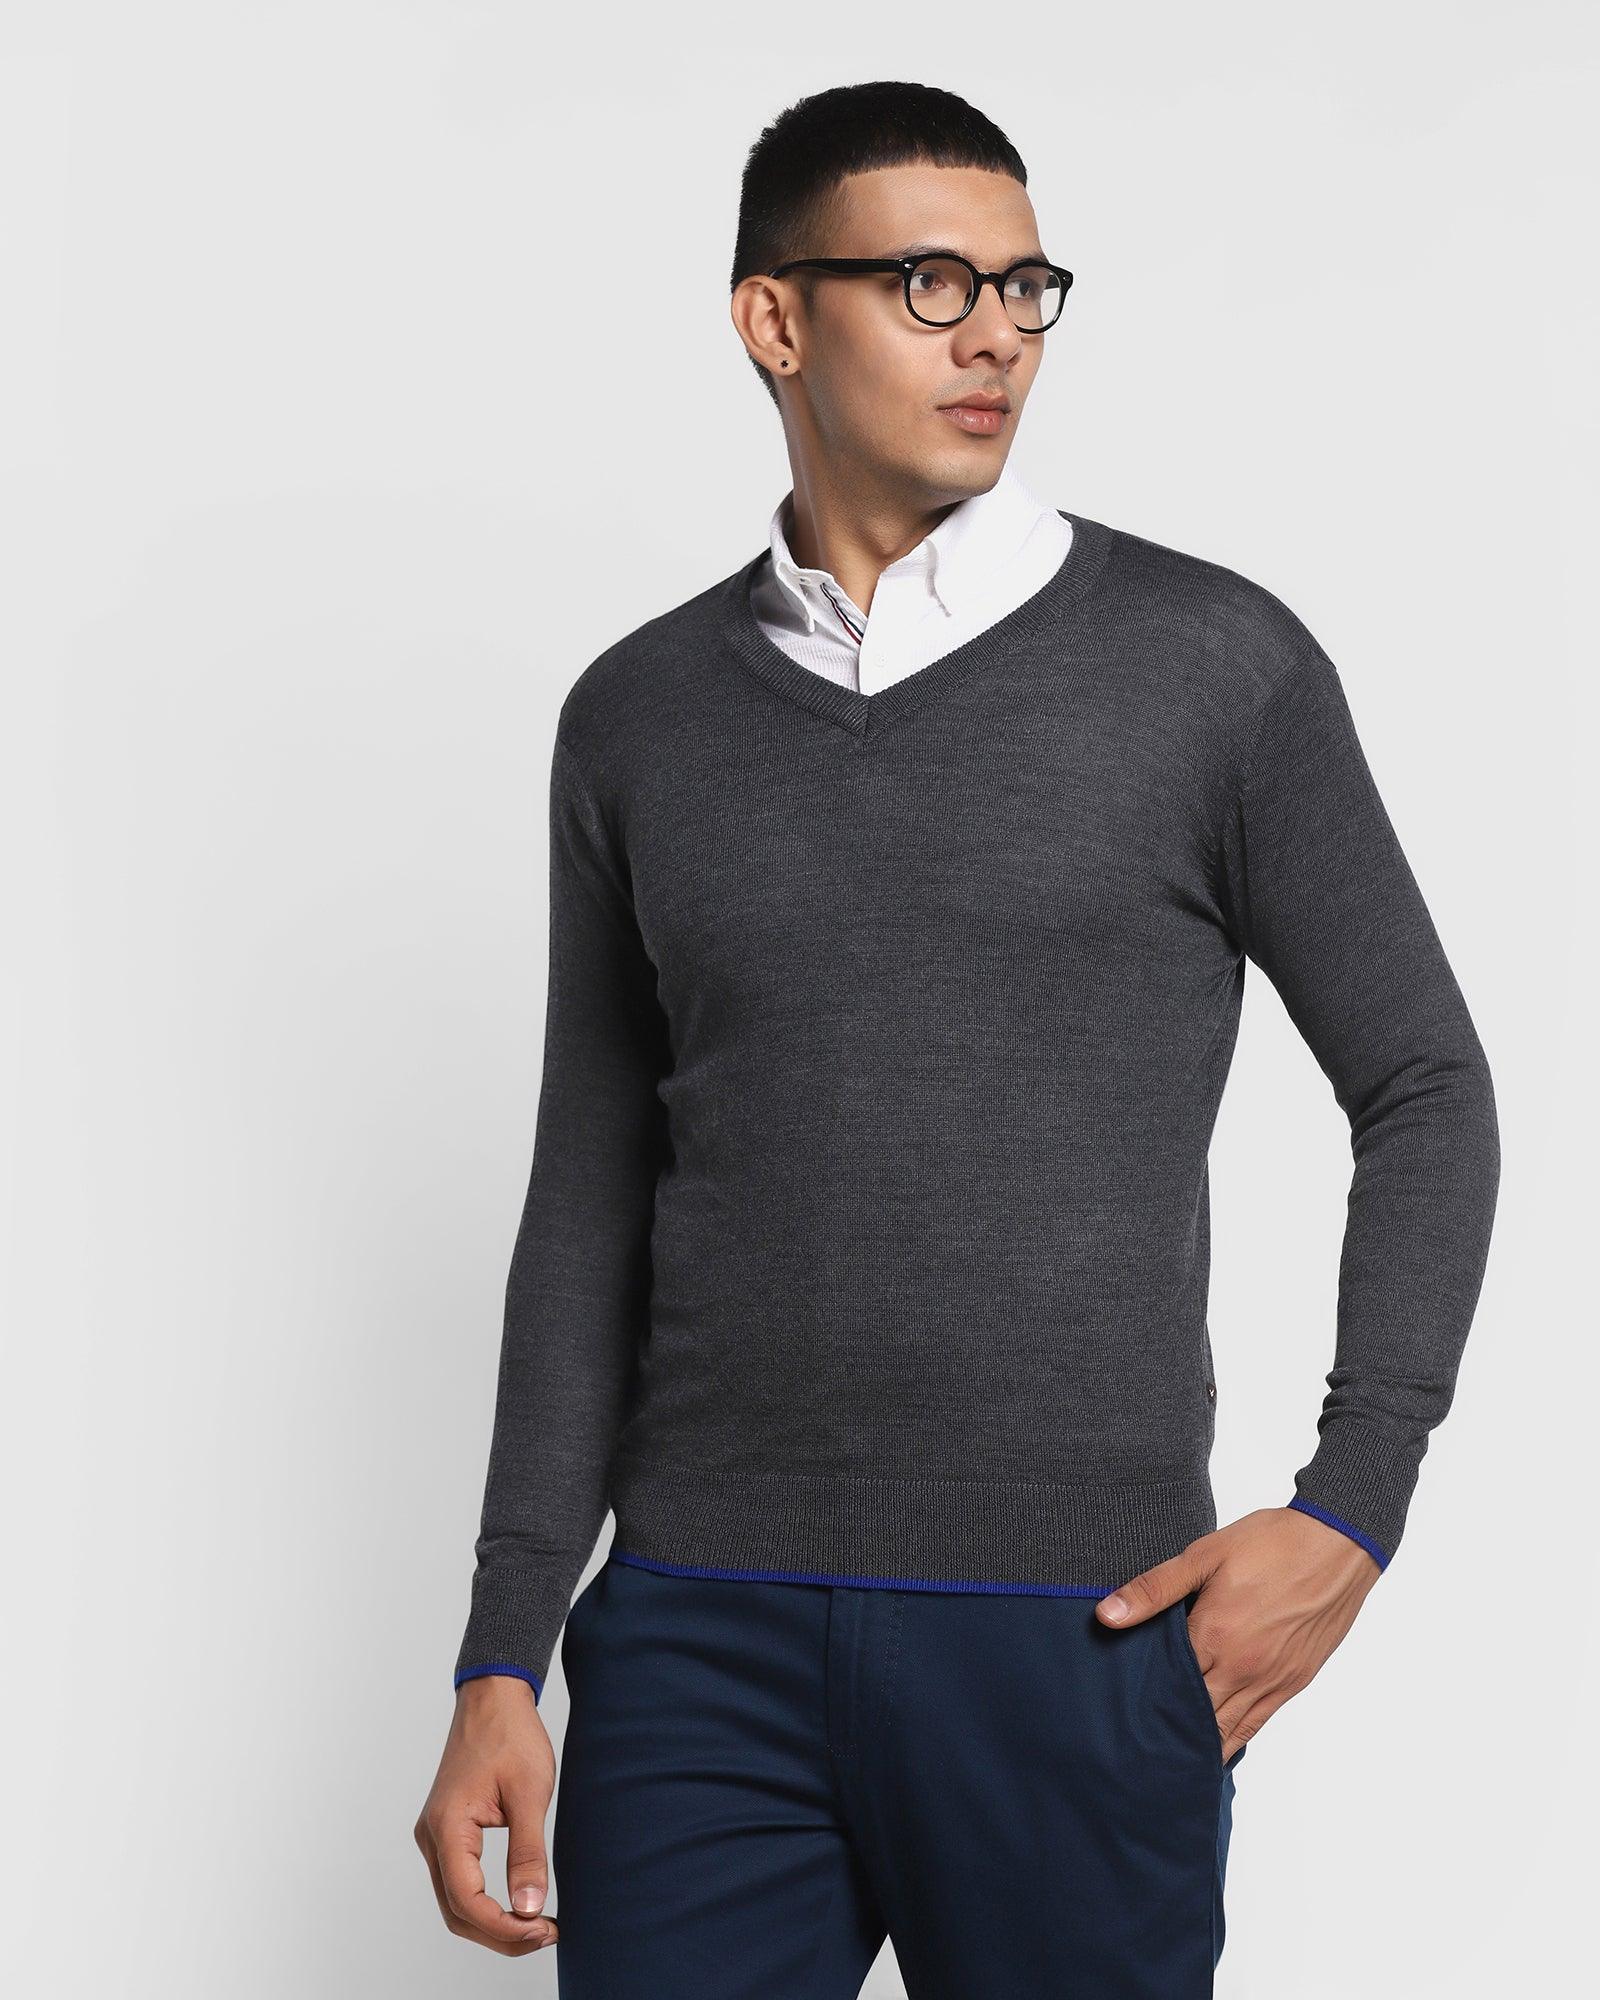 Blackberrys Long Sleeve Slim Fit Solid Sweater-Charcoal (3XL) At Nykaa Fashion - Your Online Shopping Store